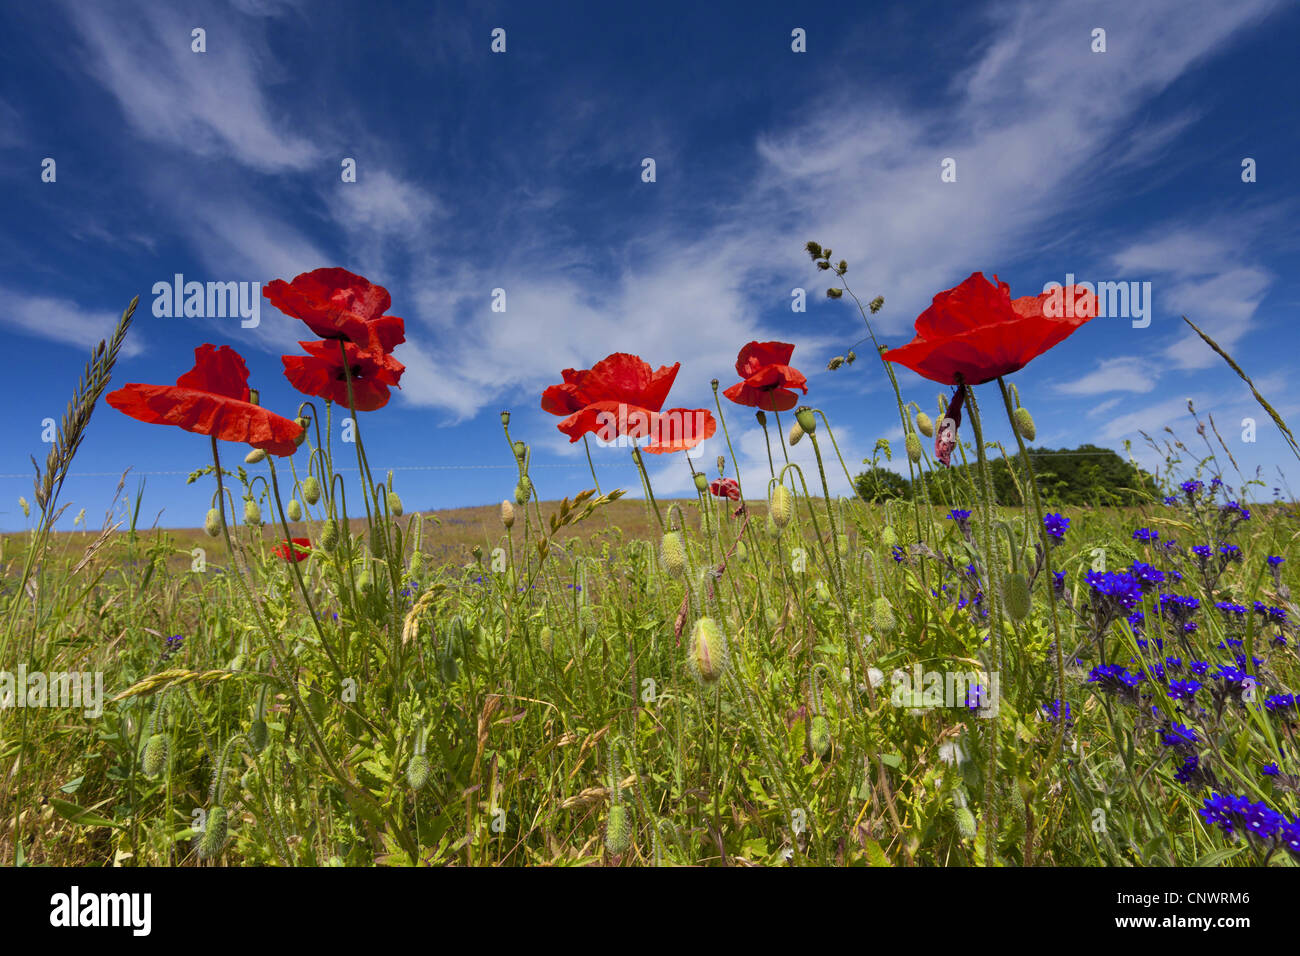 common bugloss, common alkanet (Anchusa officinalis), blooming at the edge of a meadow with common poppy, Germany, Mecklenburg-Western Pomerania, Hiddensee Stock Photo